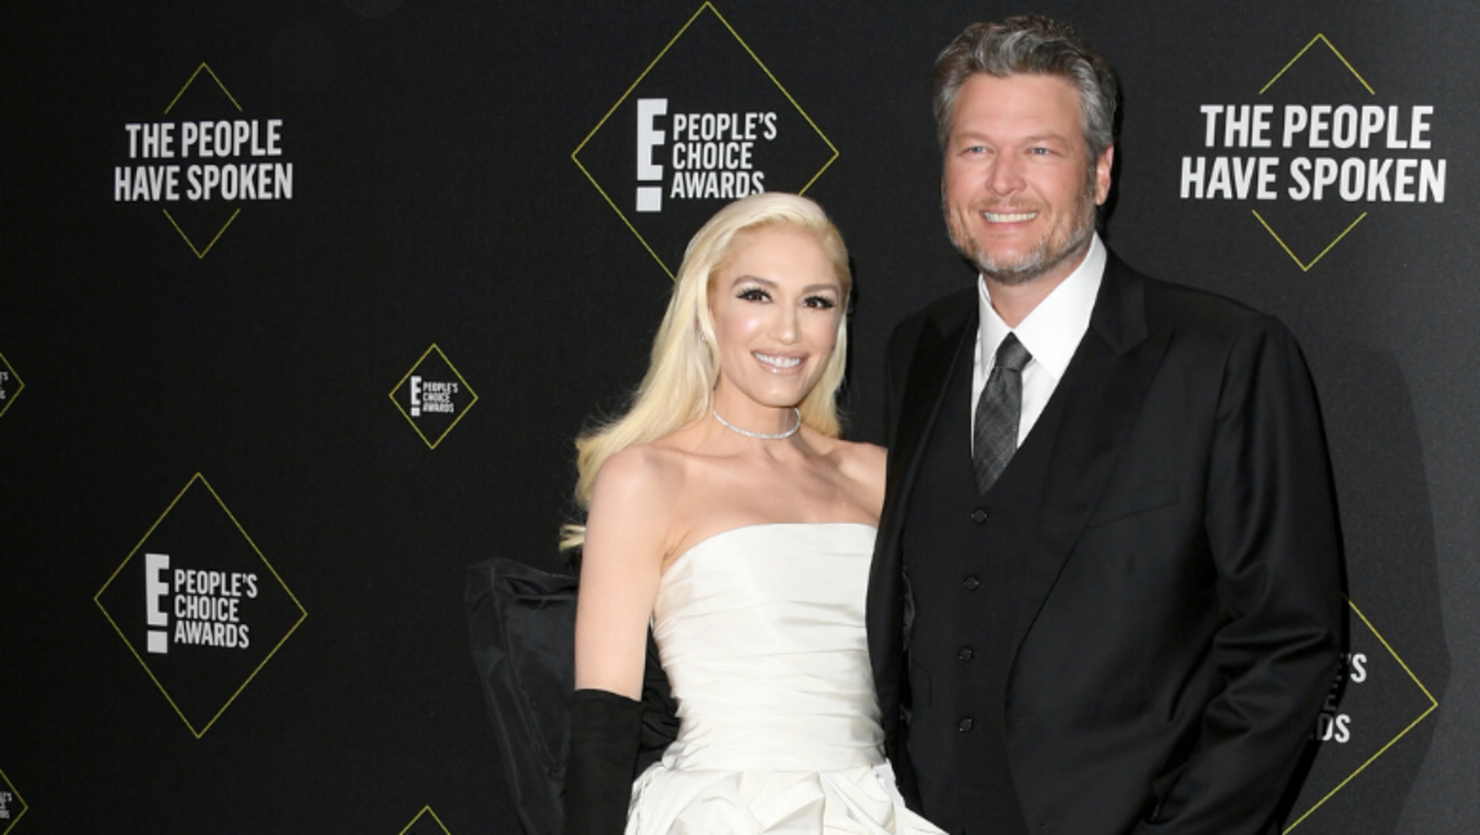 Blake Shelton And Gwen Stefani Team Up For New Duet, 'Nobody But You'